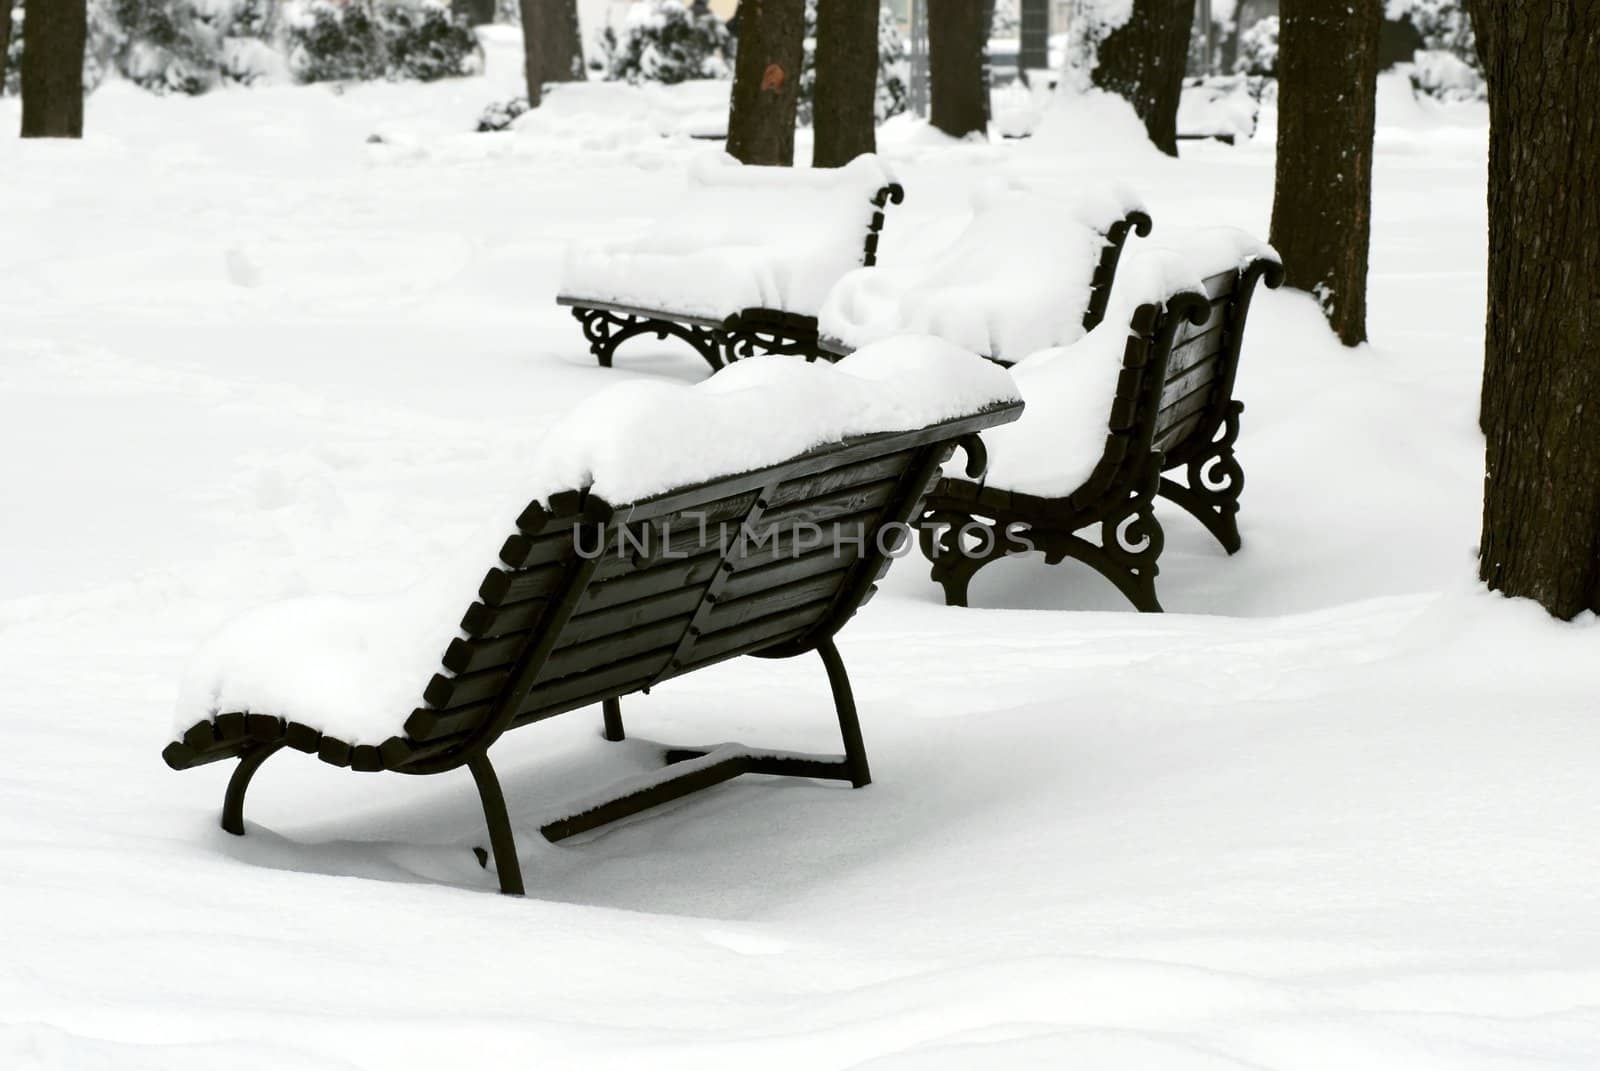 several benches at snow in winter park